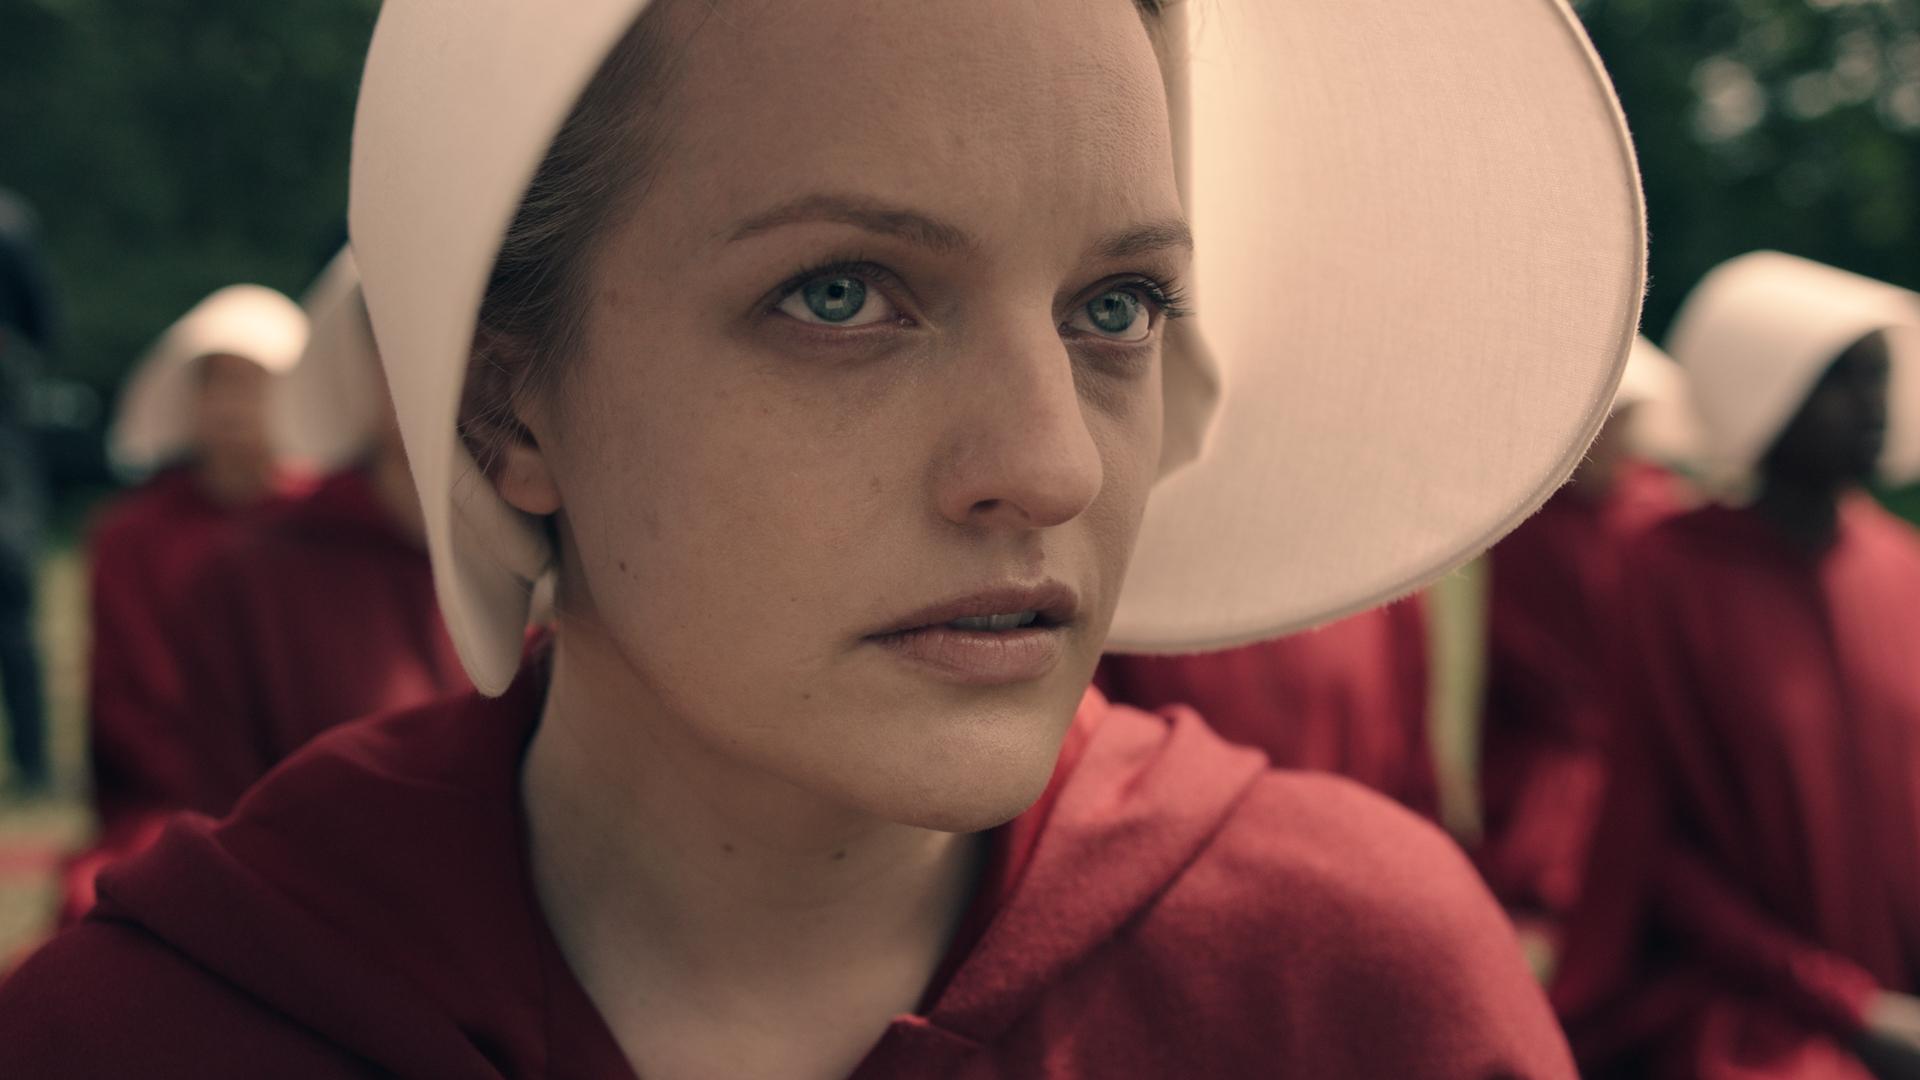 Elisabeth Moss' Offred looks at something off camera in The Handmaid's Tale